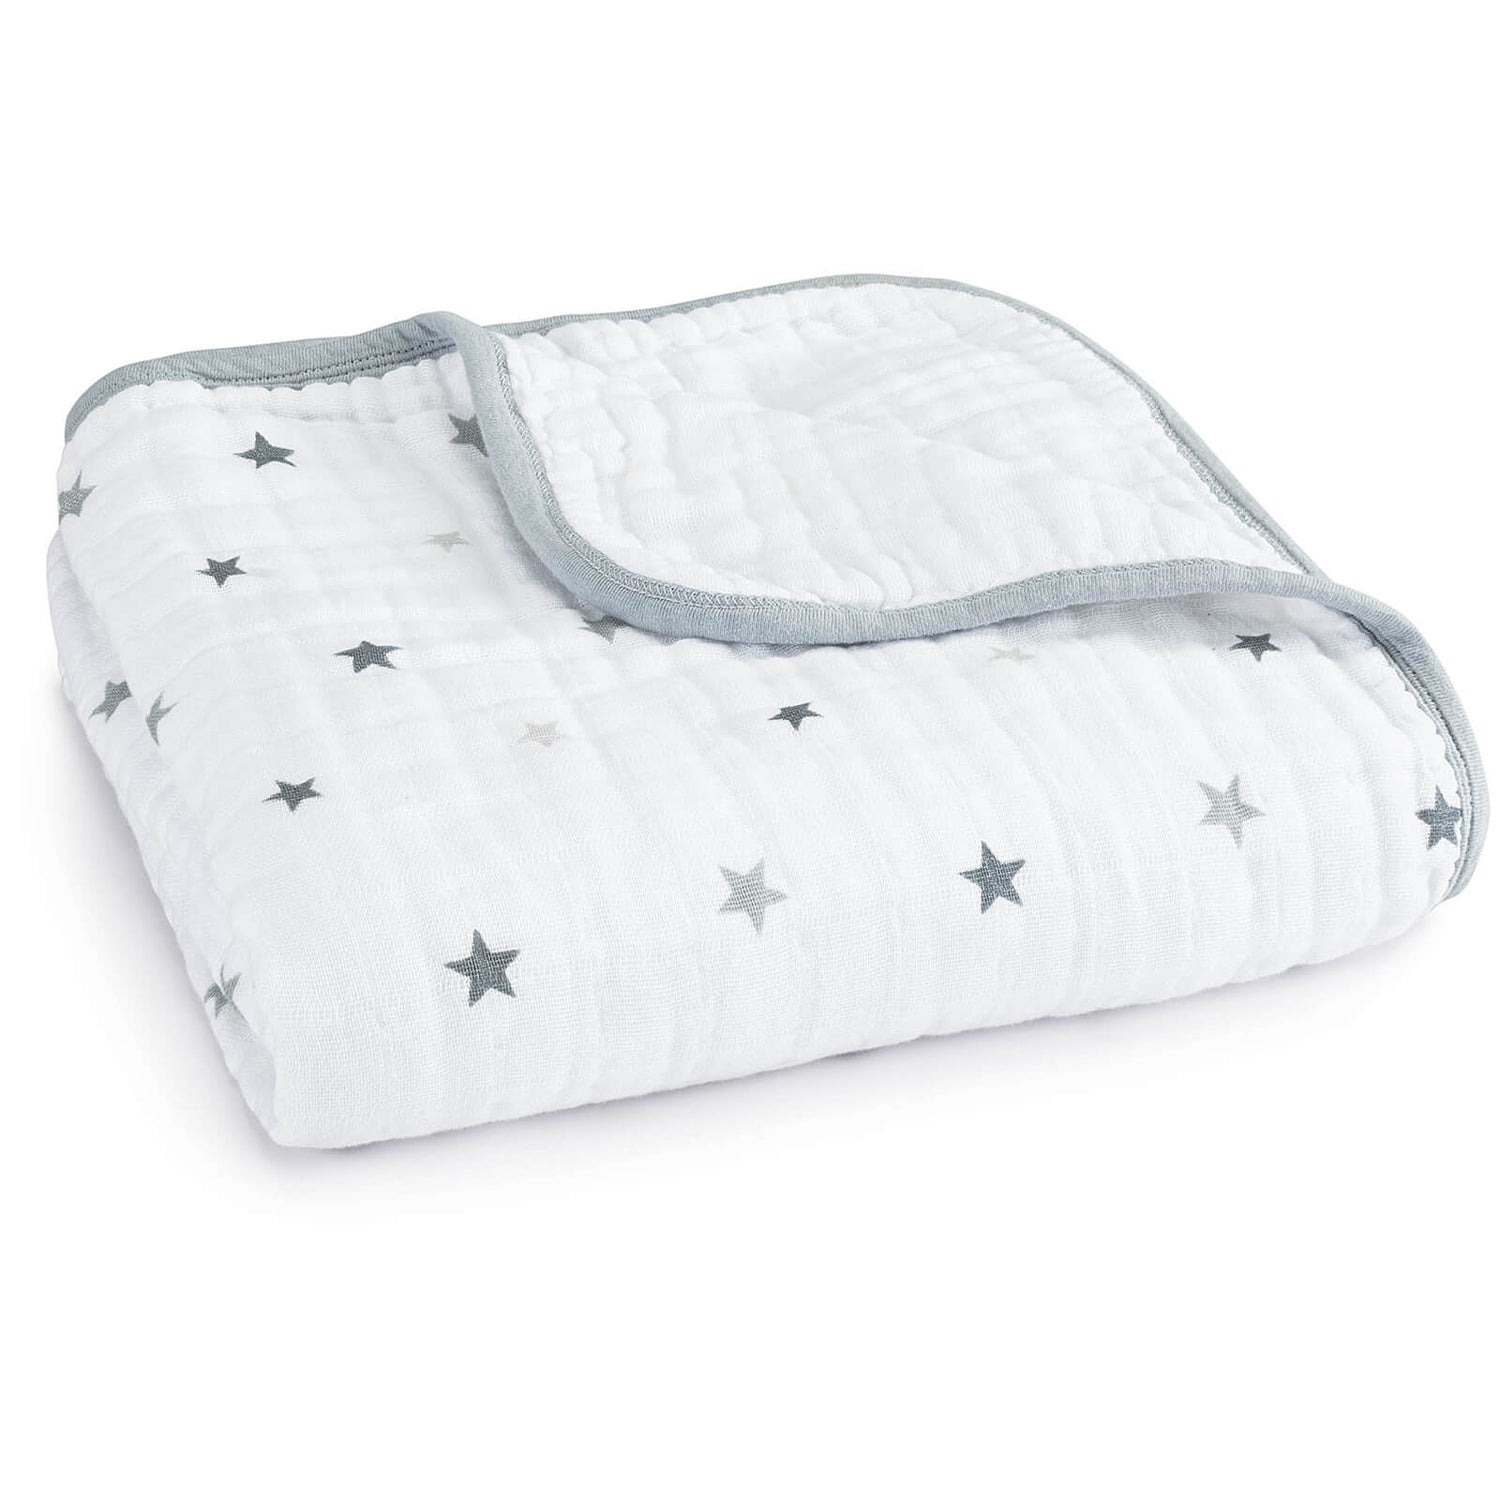 aden + anais Classic Dream Blanket Twinkle